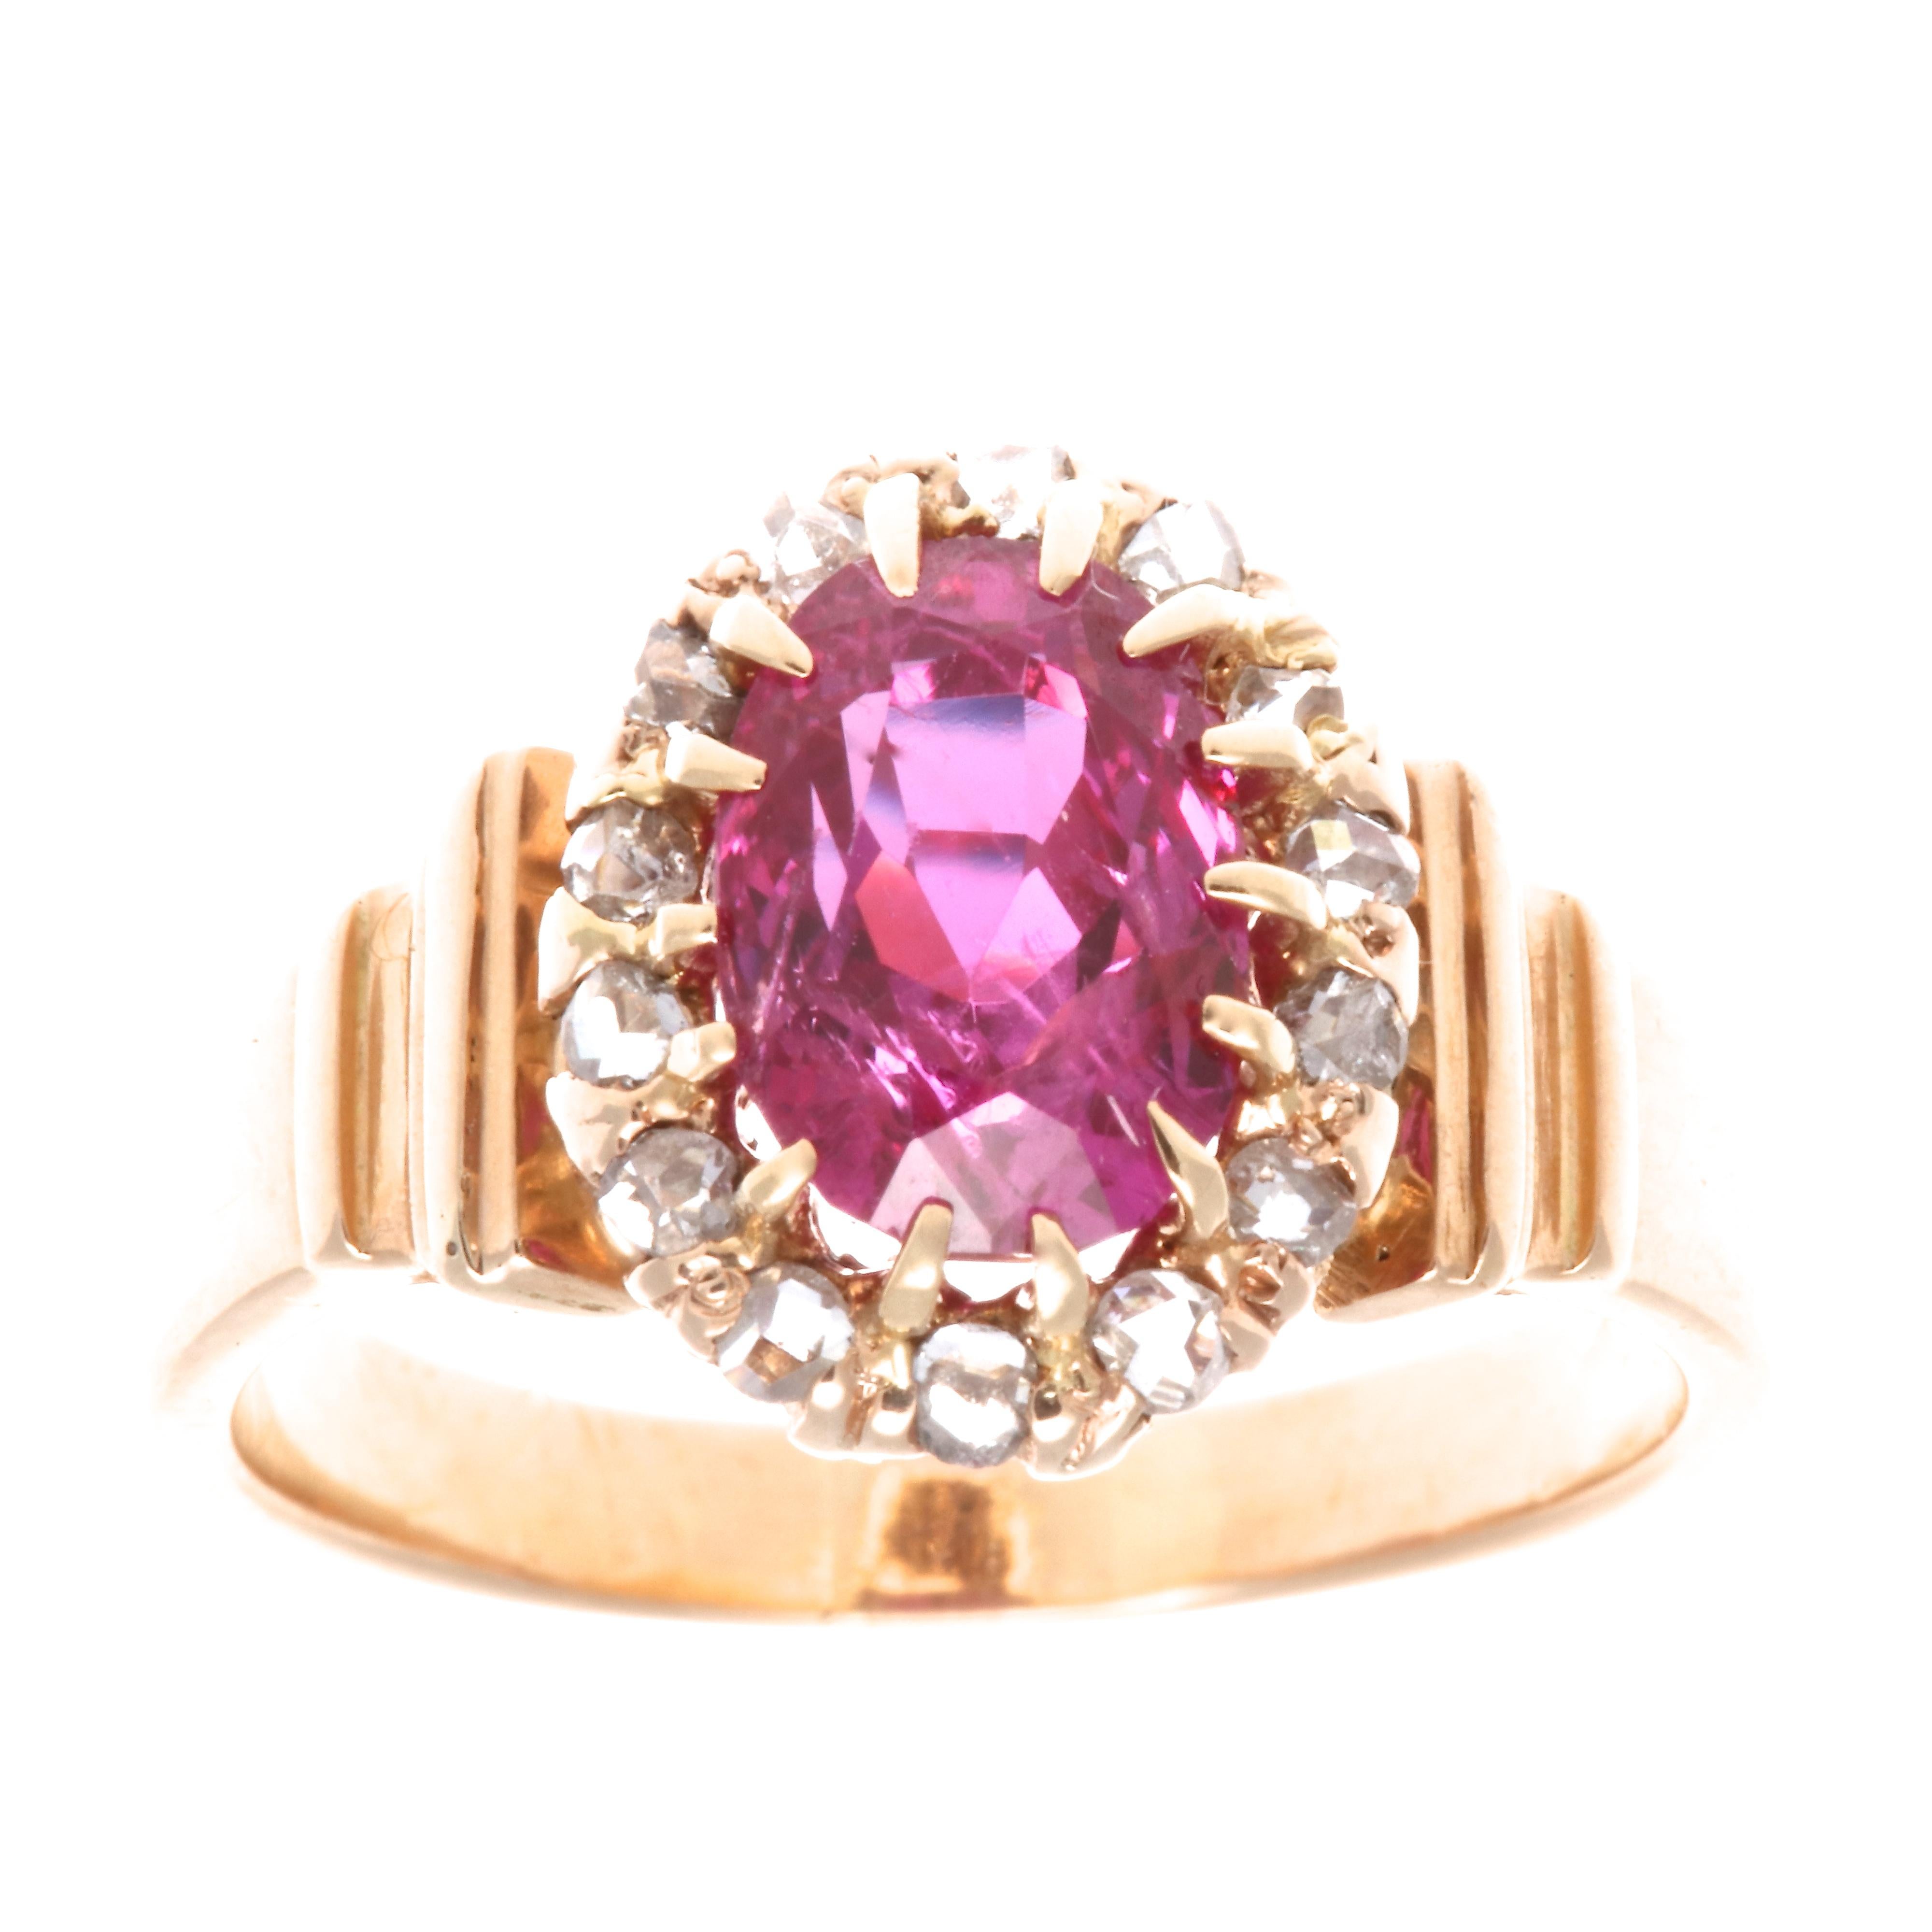 Victorian GIA 2.18 Burma no heat ruby diamond 18k gold ring. Accented by 14 rose cut diamonds, G-H color VS-SI clarity. Circa 1800's. (GIA #6213082105) Ring size size 5 and may easily be re-sized to fit. 
Flawless Protection Plan: 
7 day return